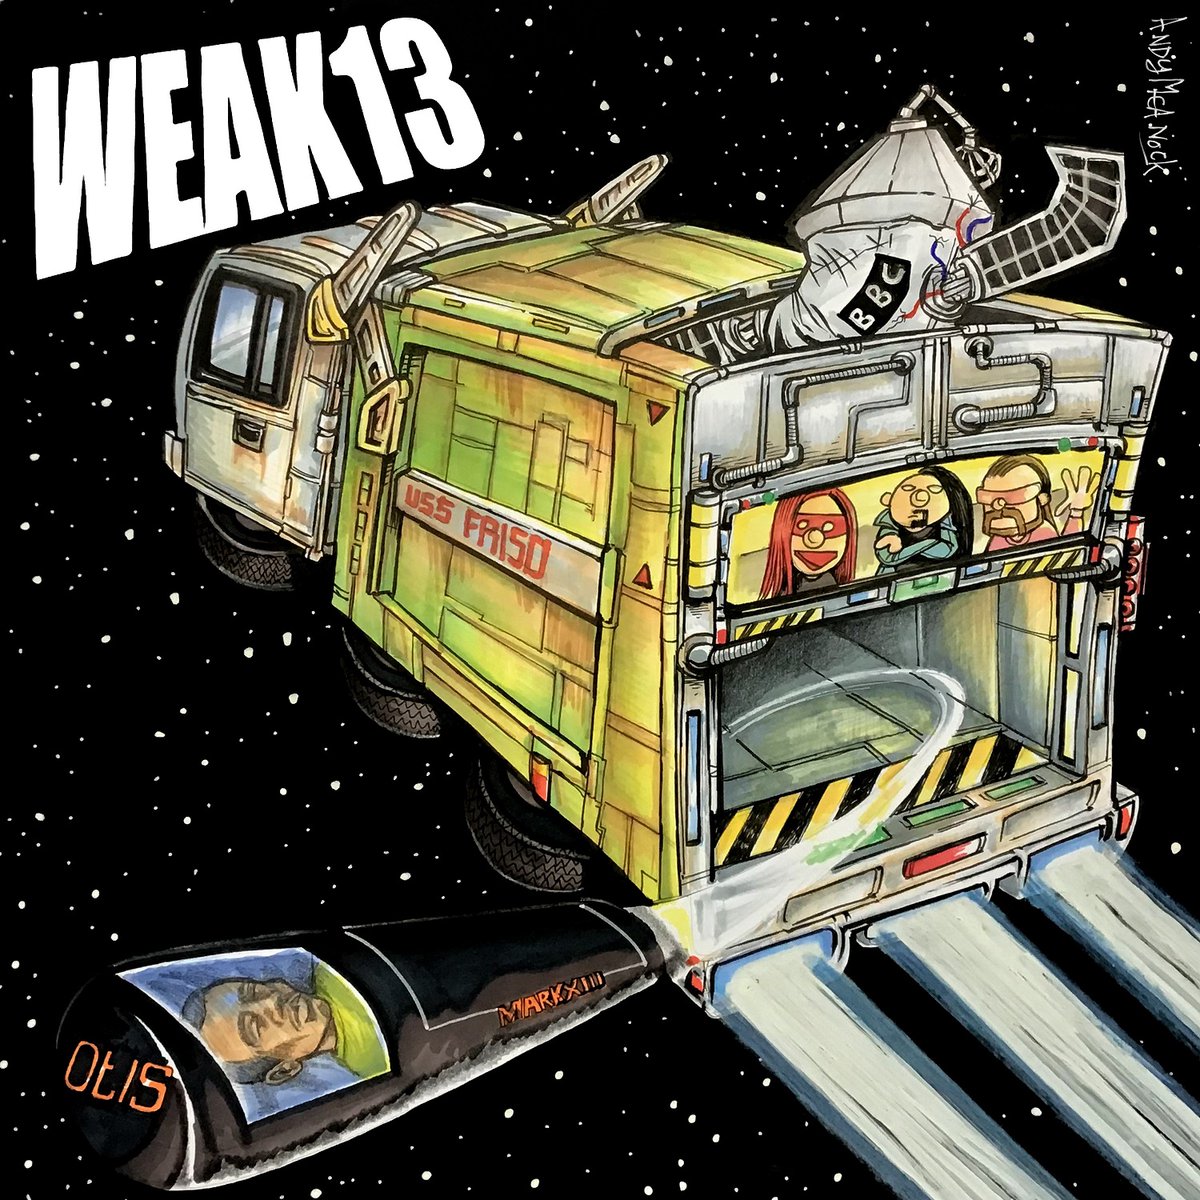 Its tasty and its here on MM Radio with (Sittin' On) the Dock of the Bay thanks to @WEAK13 Listen here on mm-radio.com